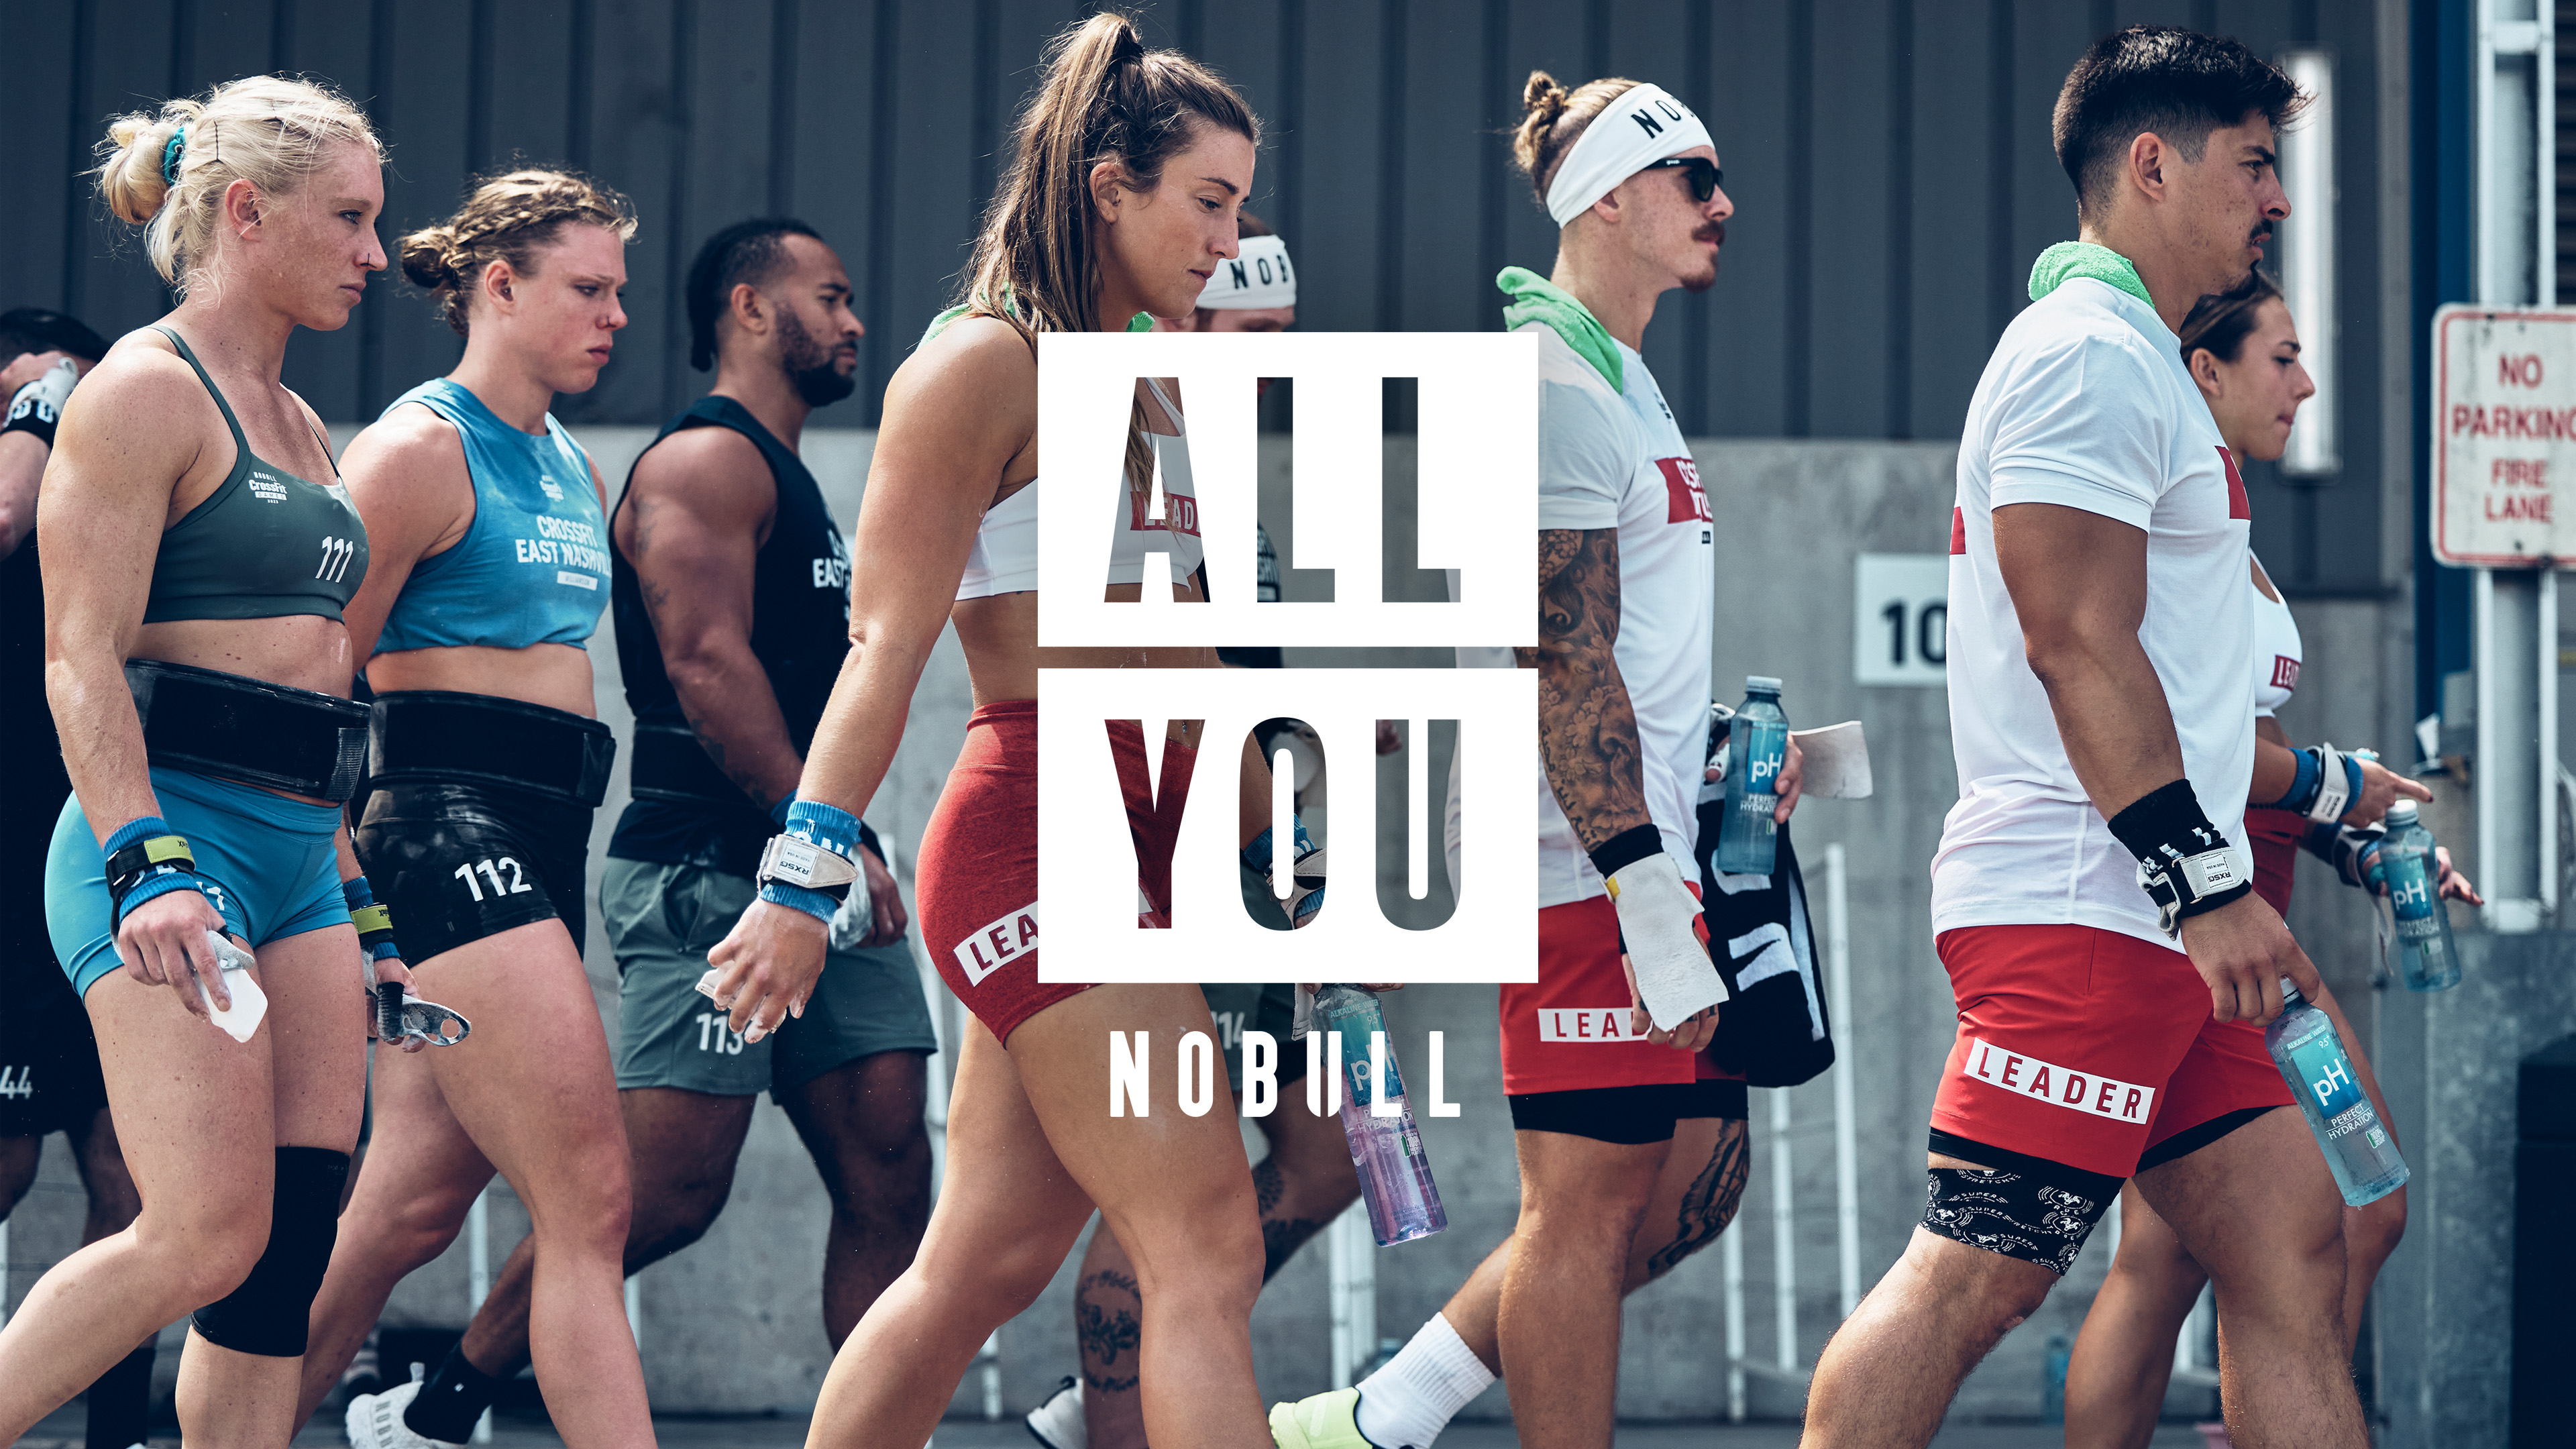 Nobull to Share Jersey Profits With Athletes at 2022 CrossFit Games